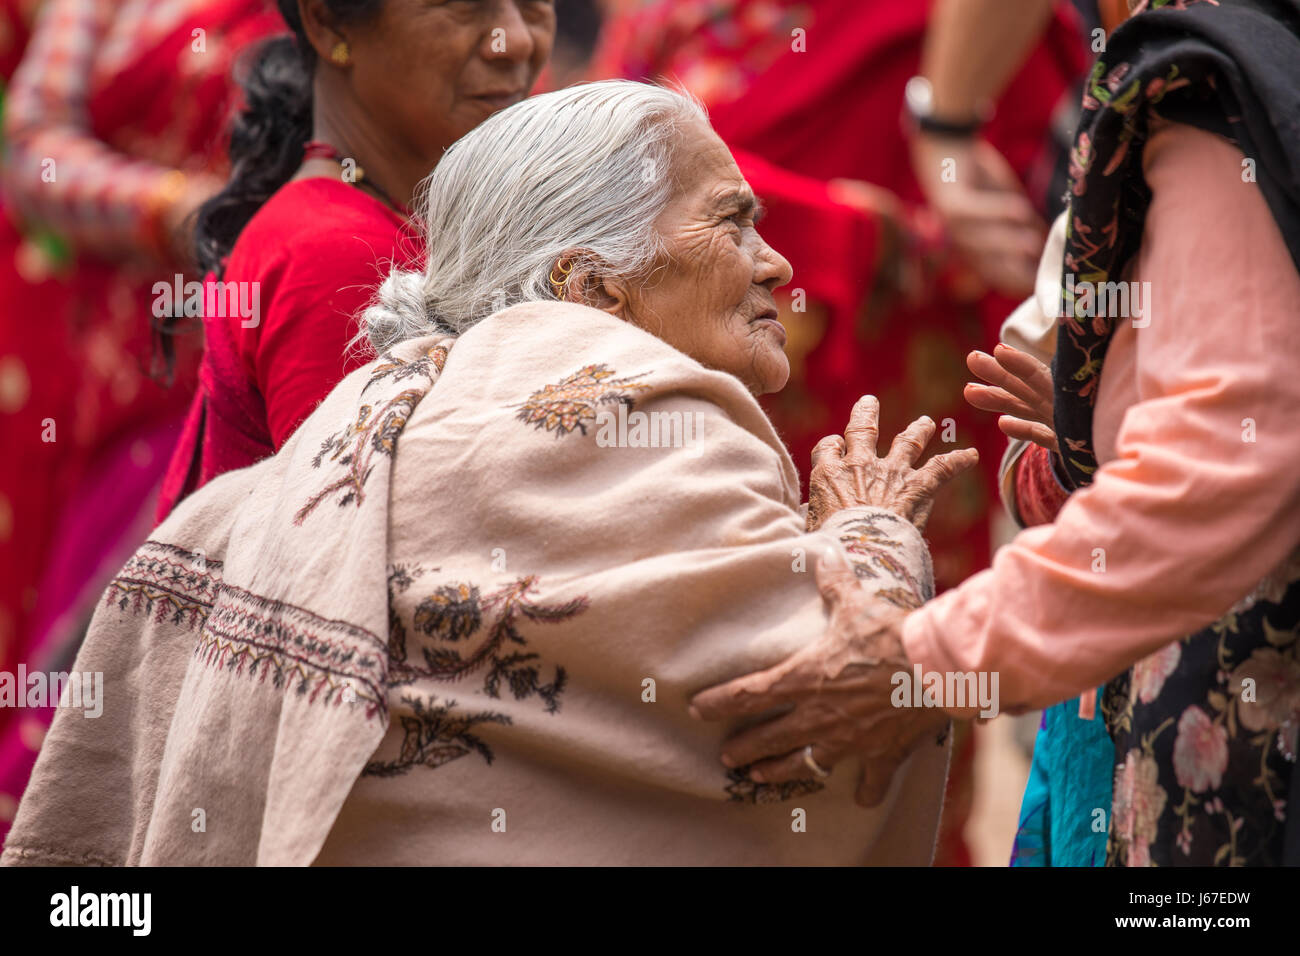 Kathmandu, Nepal - Apr 15, 2016: Elderly ladies in traditional Nepalese clothing watching a passing ceremony procession. Stock Photo